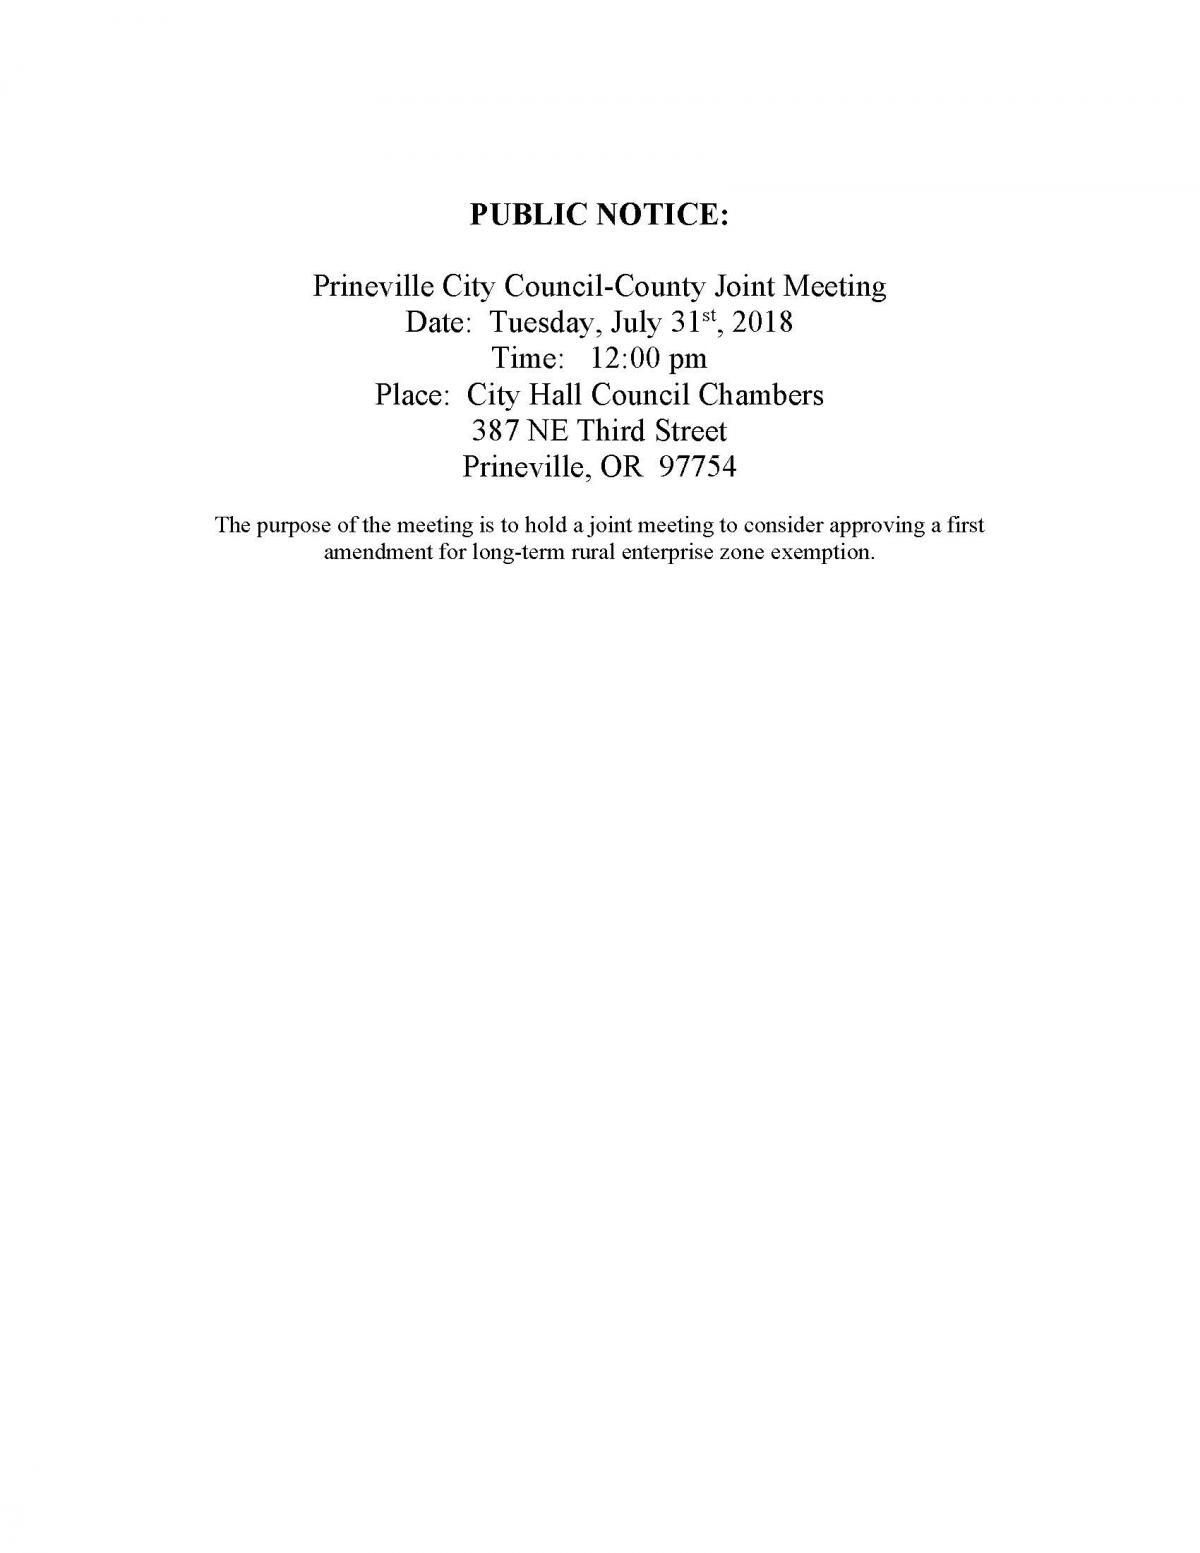 Public Notice - Joint City-County Meeting 7-31-18